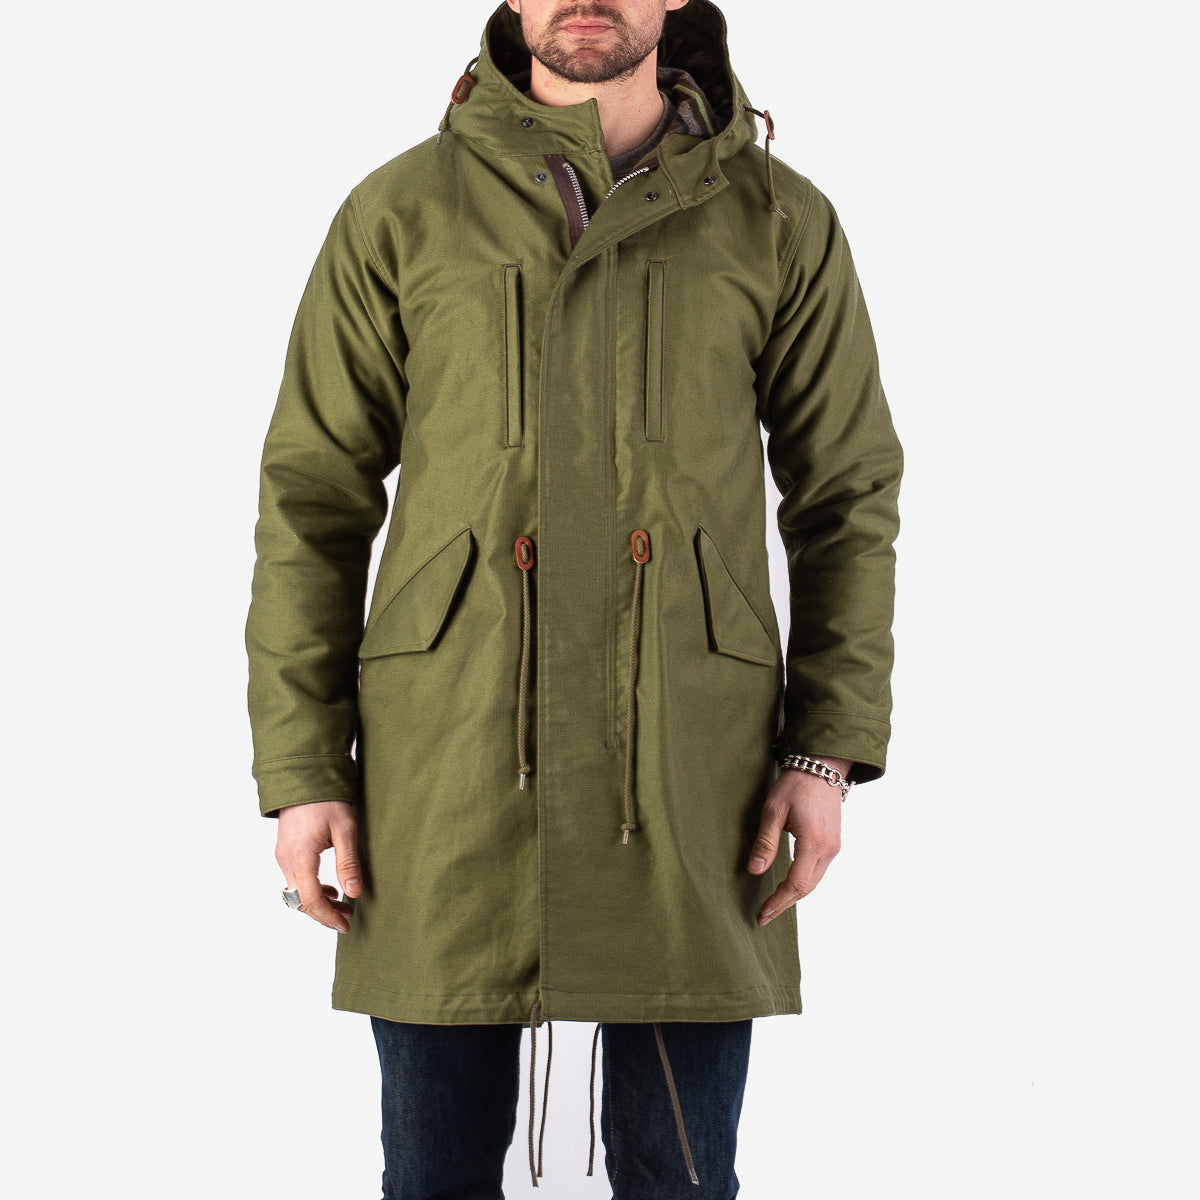 Iron M-51 – Drab Olive Field Coat IHM-34 Whipcord Heart